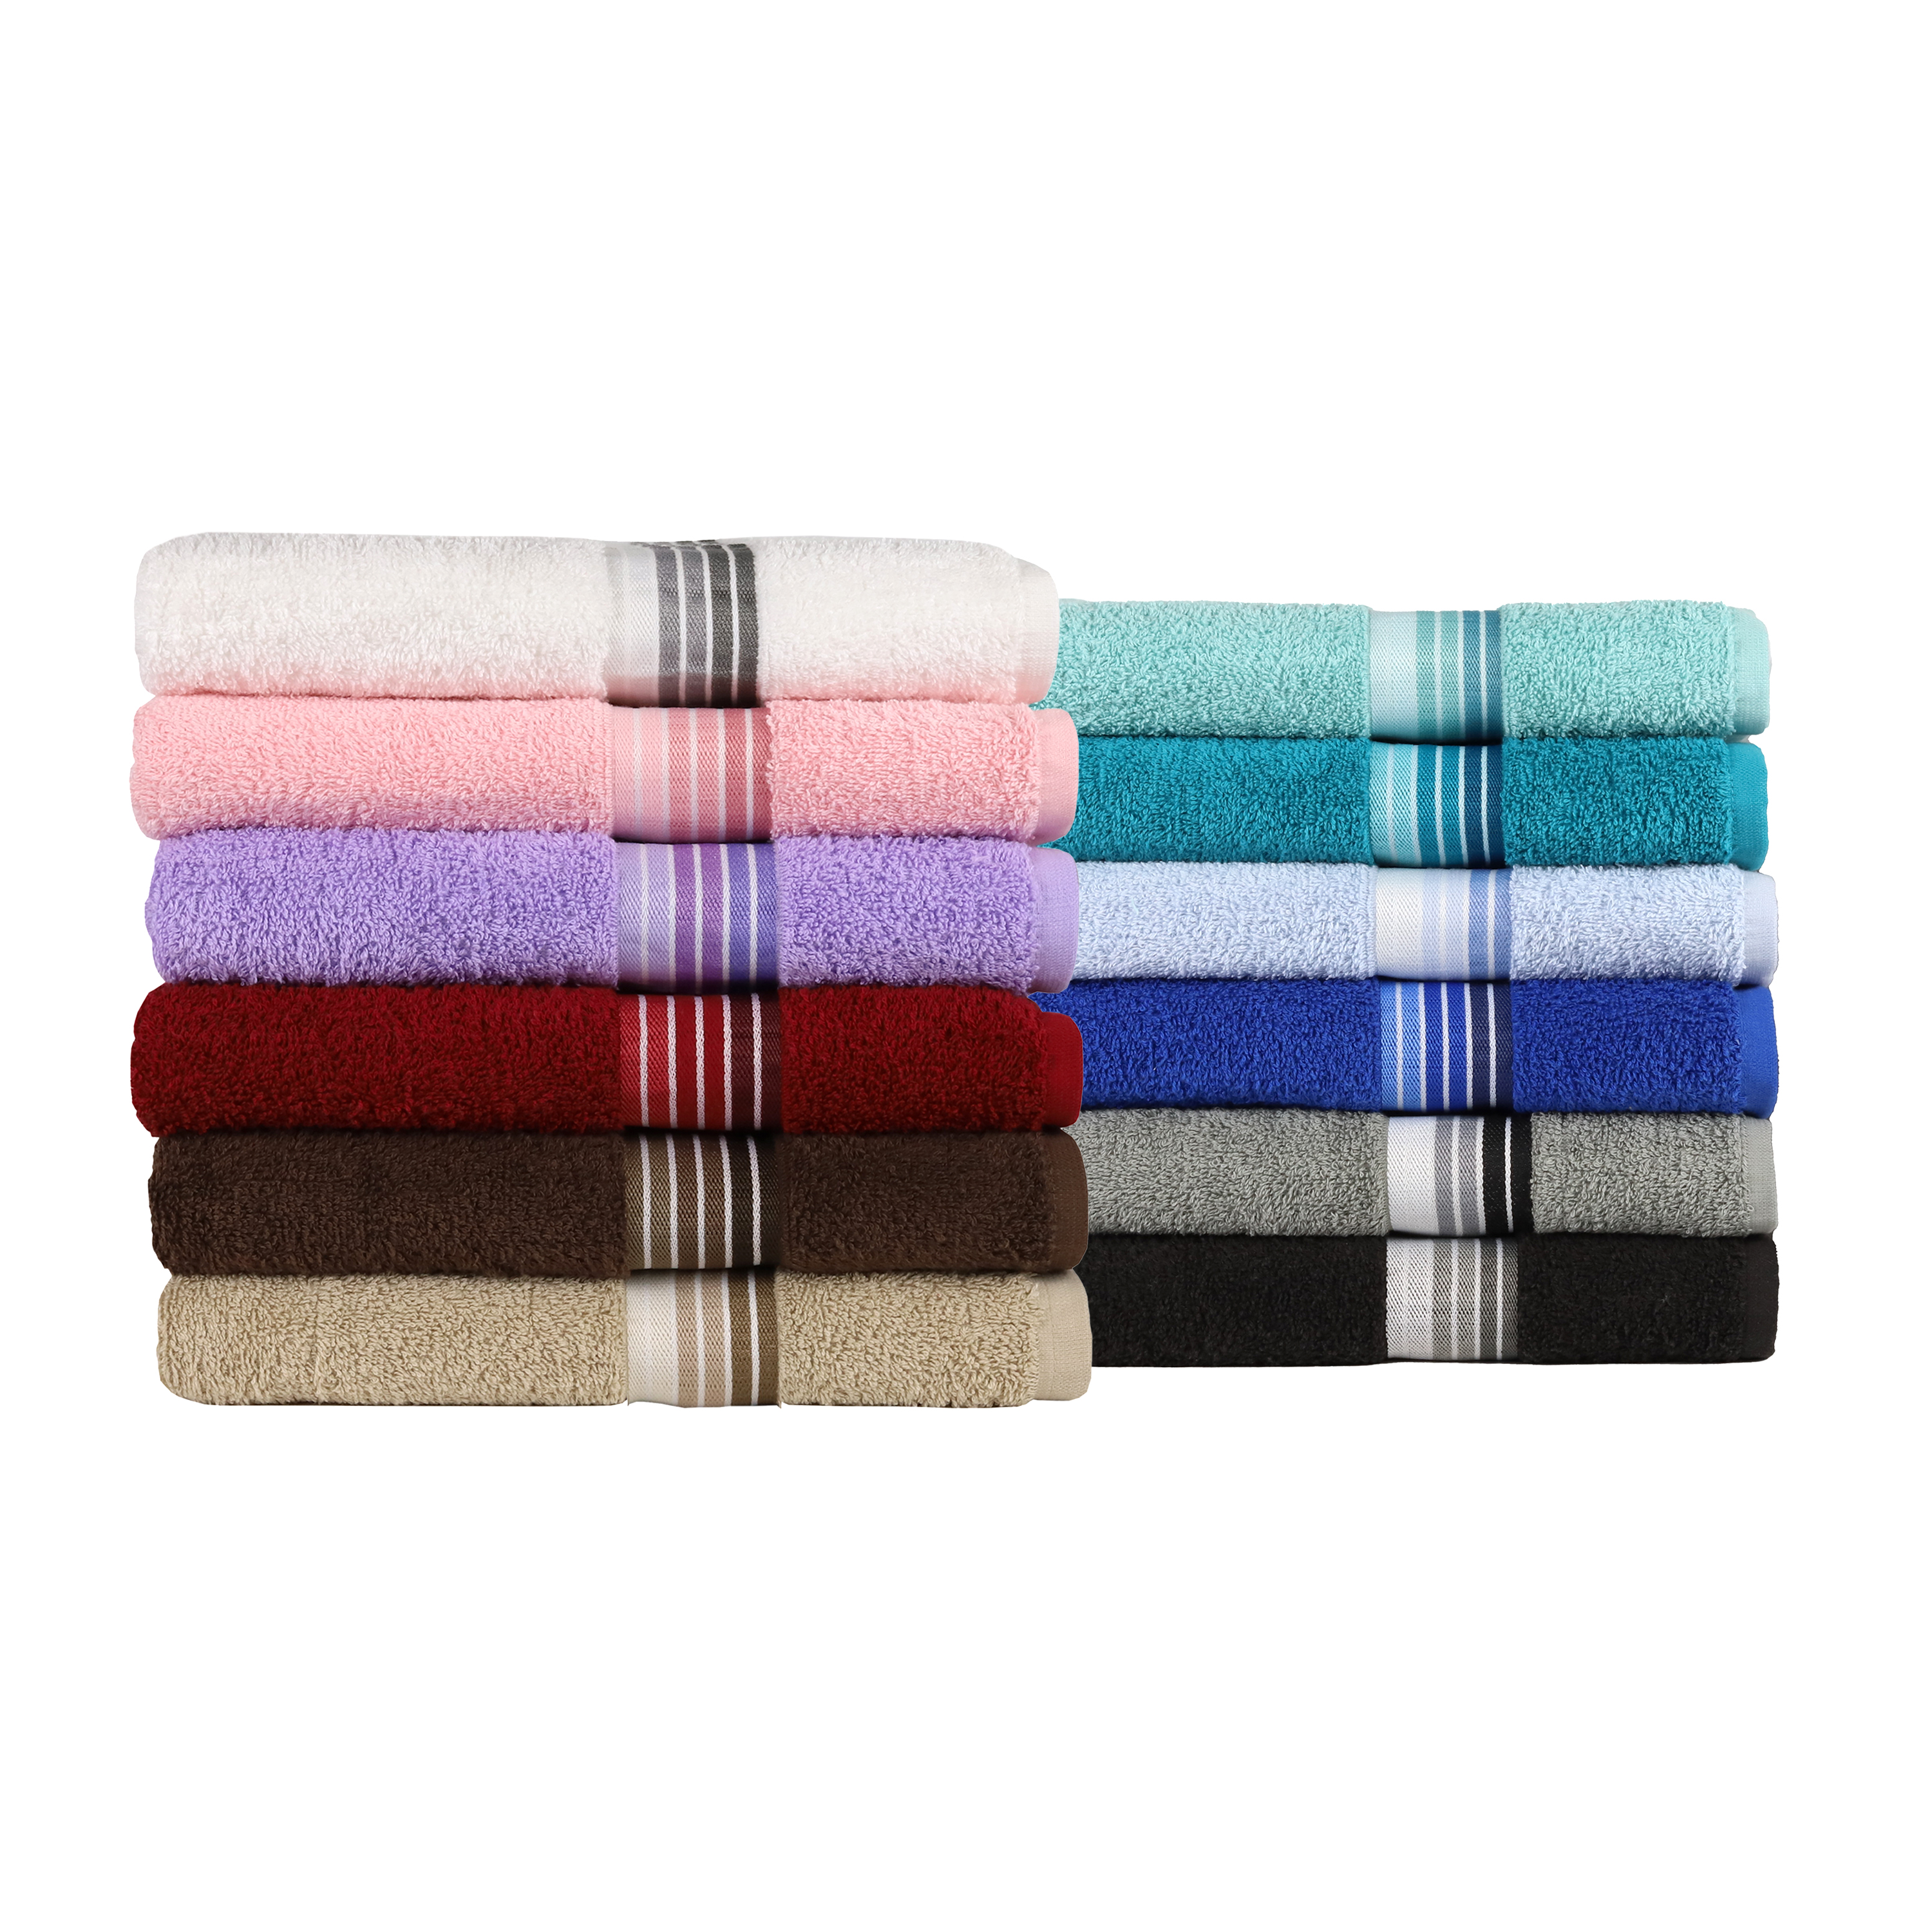 Mainstays Ombre Stripe Bath Towel, Clearly Aqua - image 3 of 9